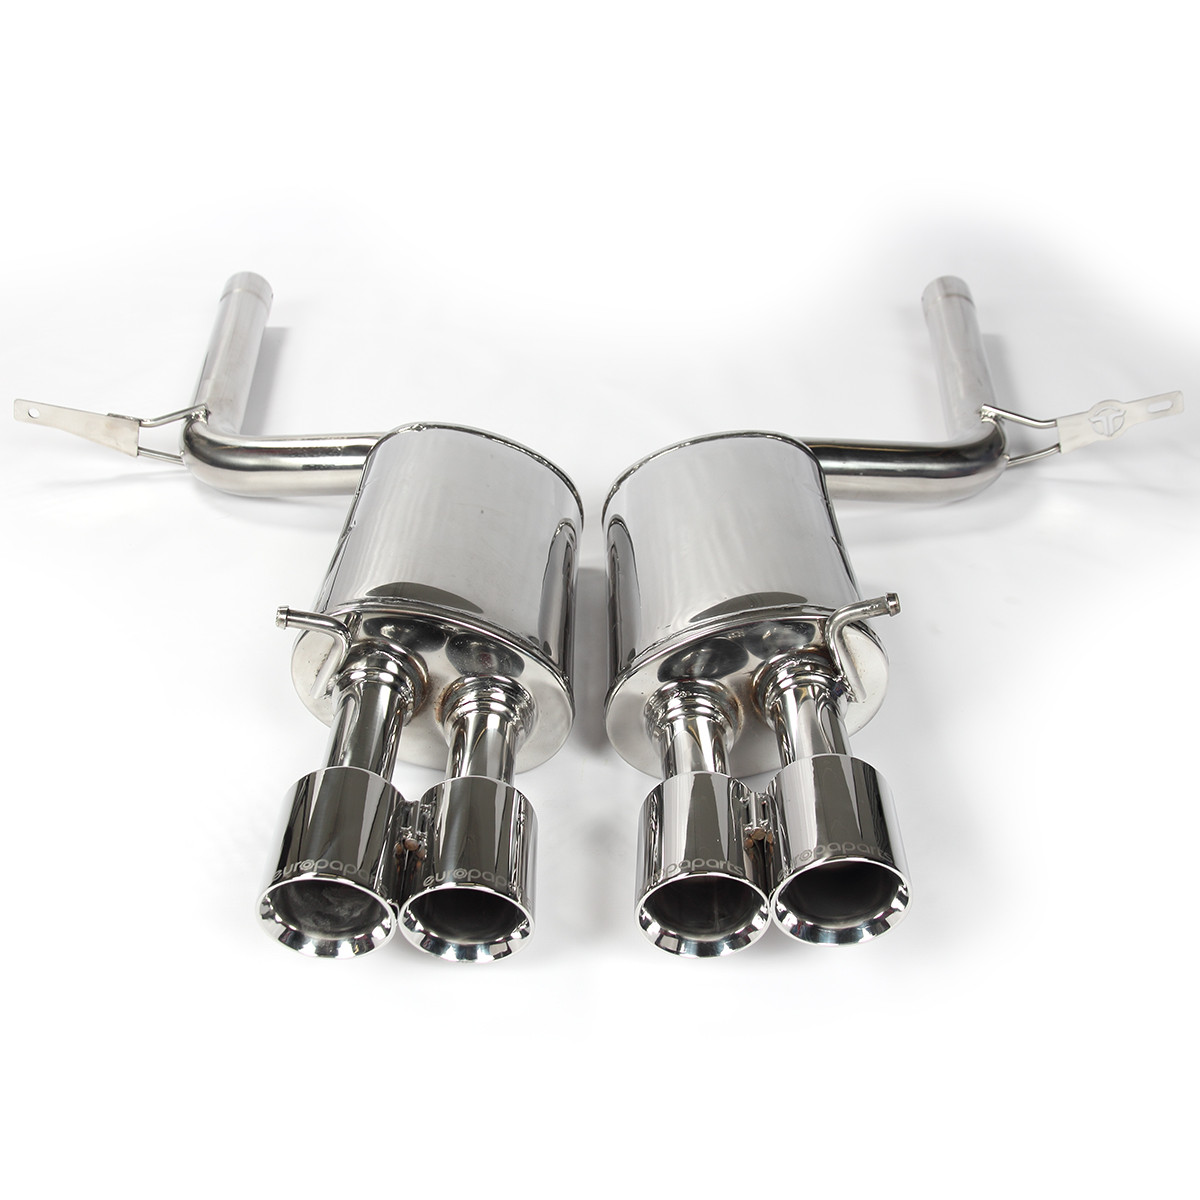 Audi Performance Exhaust System (S4 B7) B1109-C1109 by Europa Parts